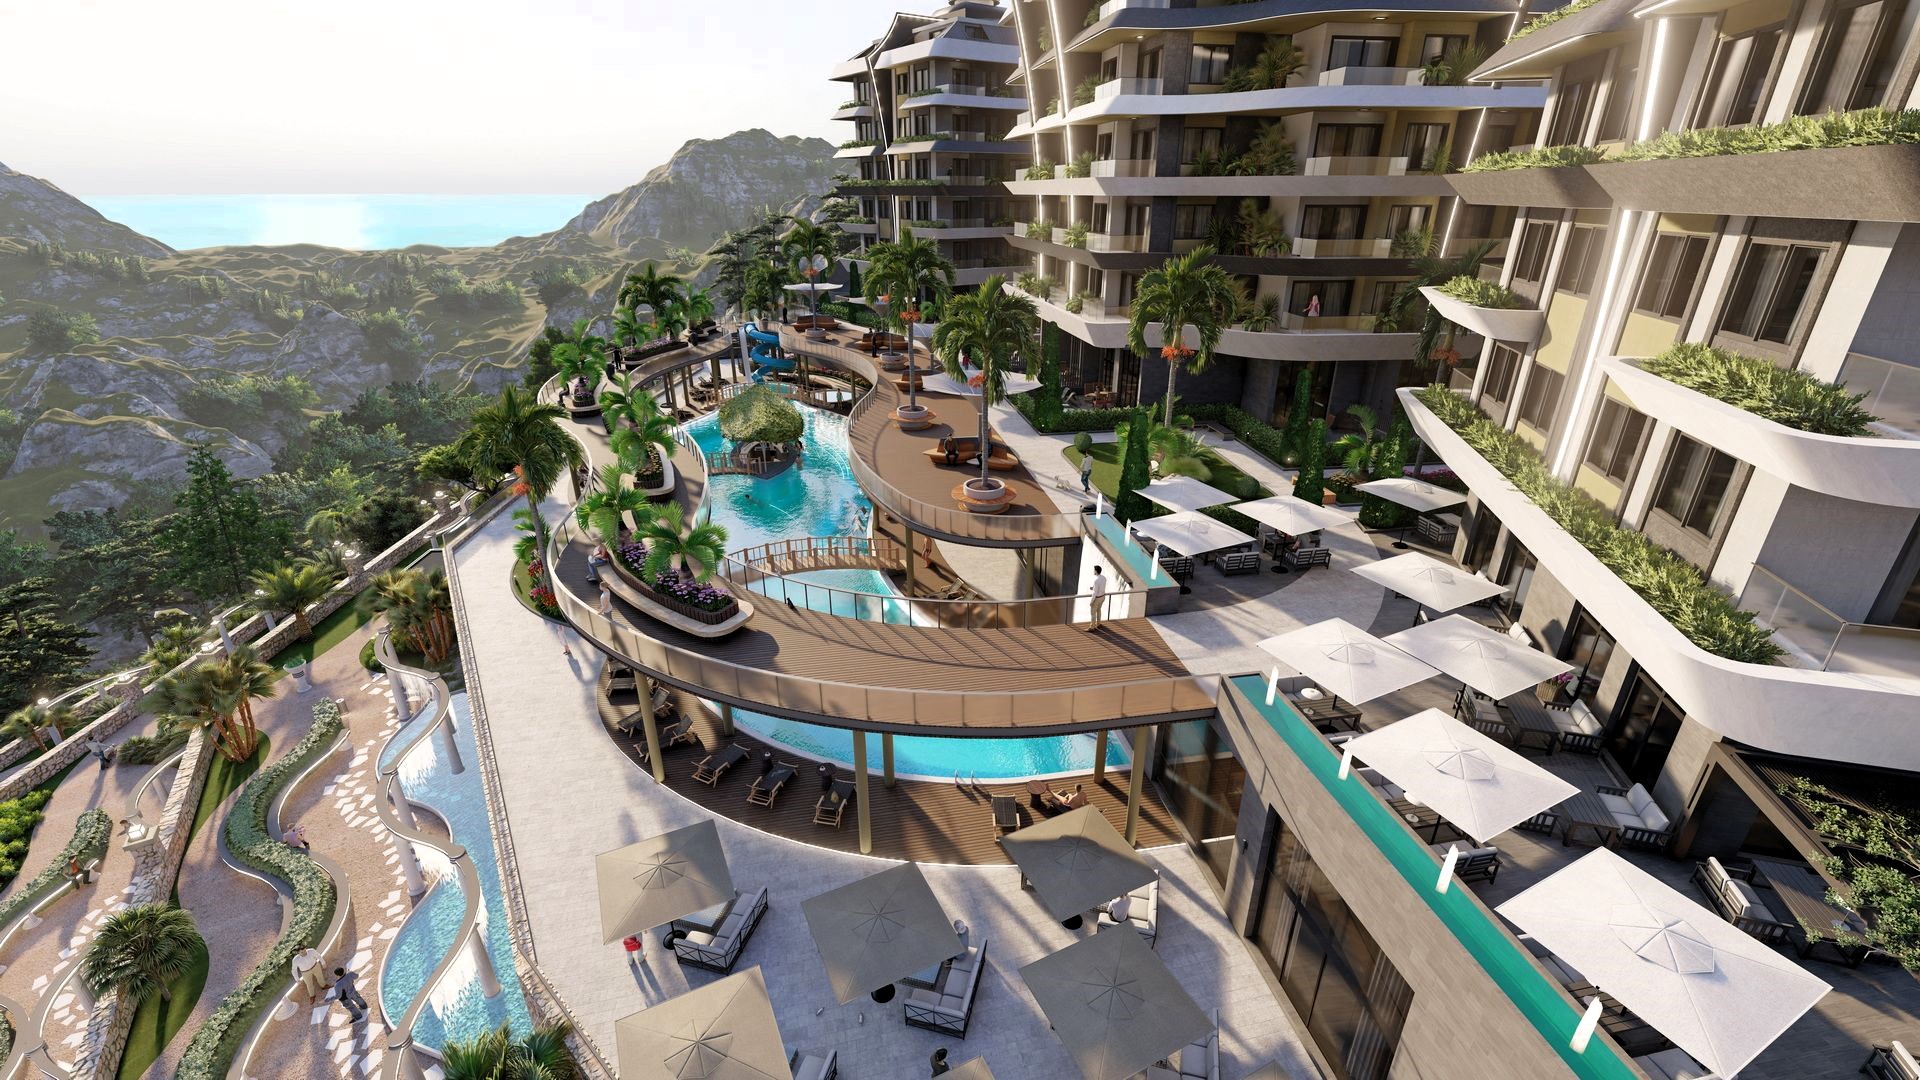 An ultra-modern residential complex in a picturesque area with amazing views of the sea and nature